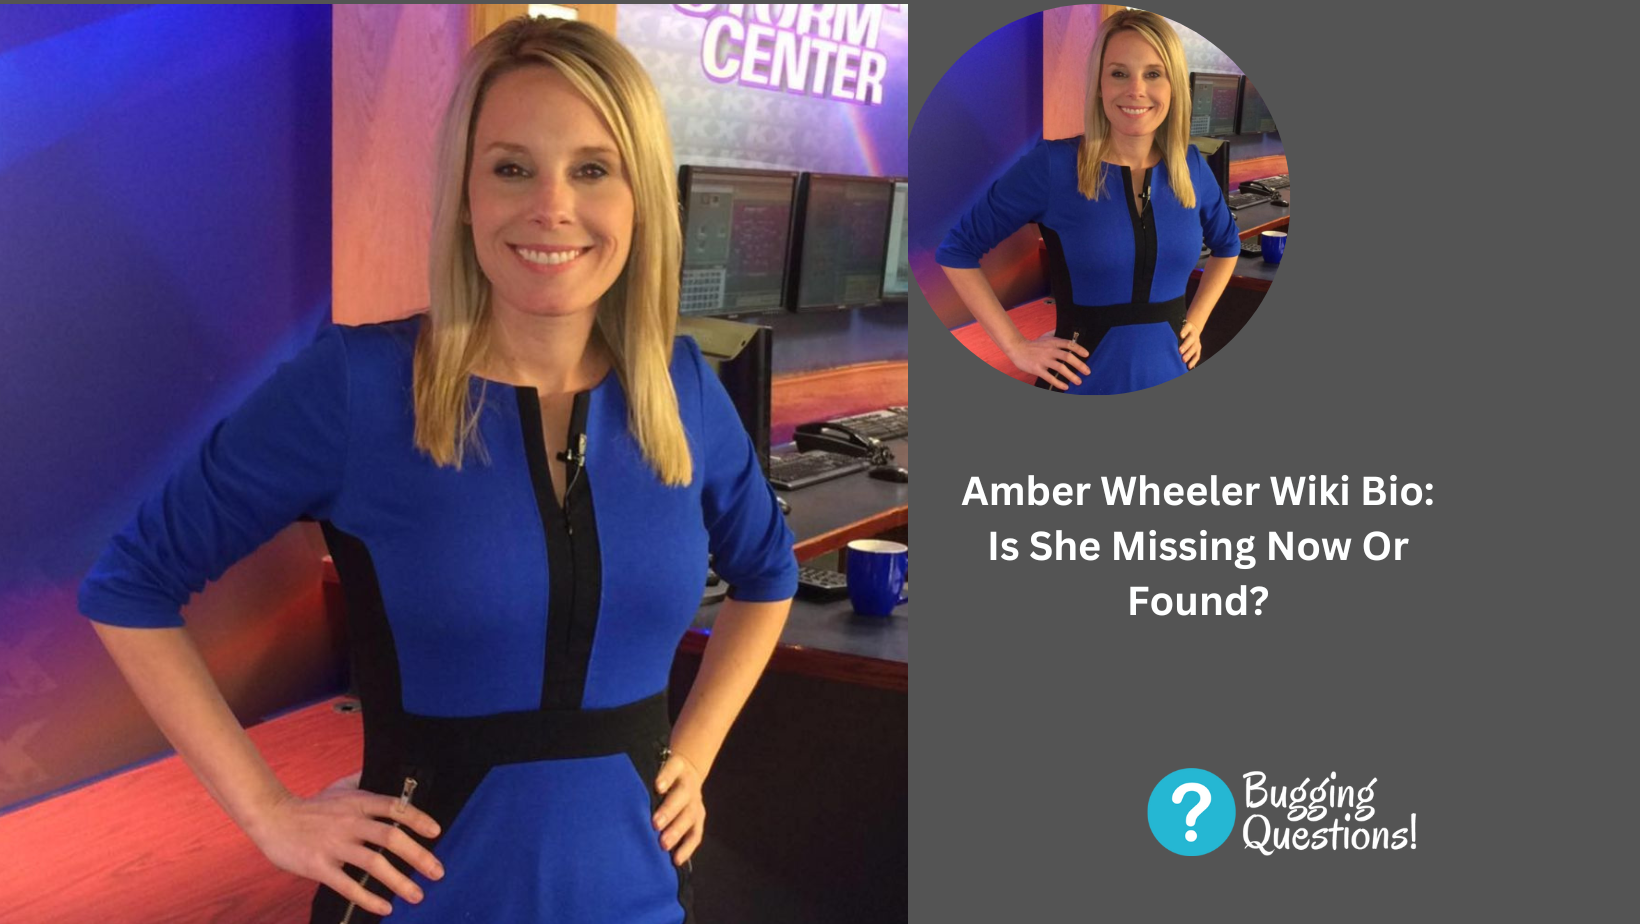 Amber Wheeler Wiki Bio: Is She Missing Now Or Found?